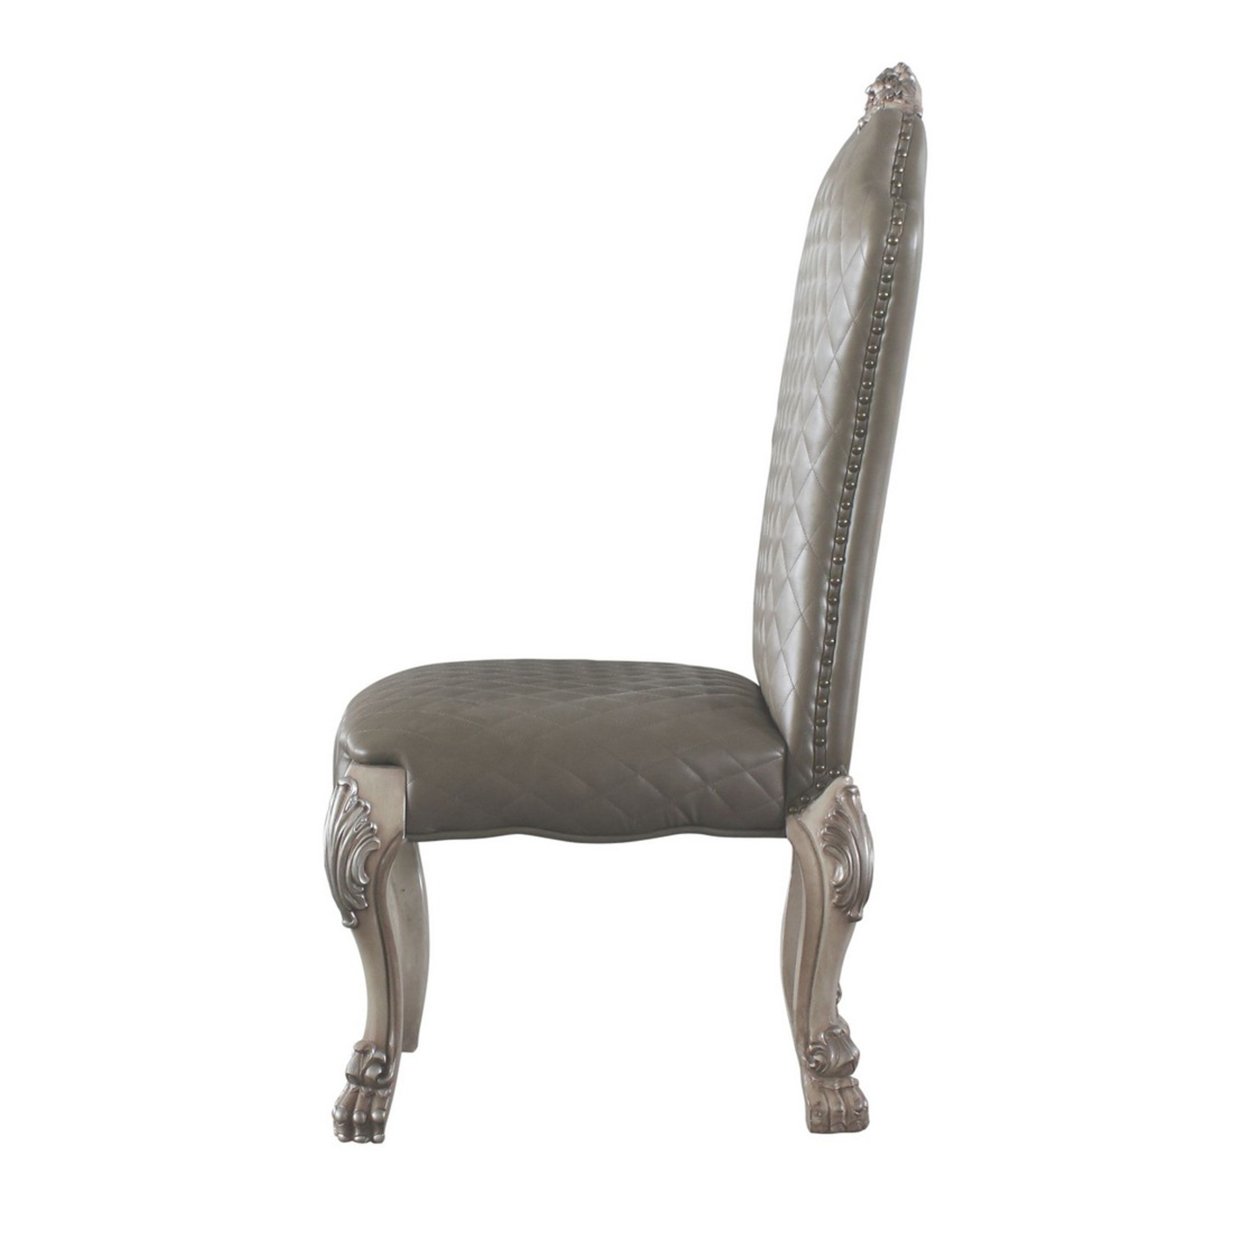 Leatherette Side Chair With High Back And Claw Legs, Set Of 2,Antique White- Saltoro Sherpi